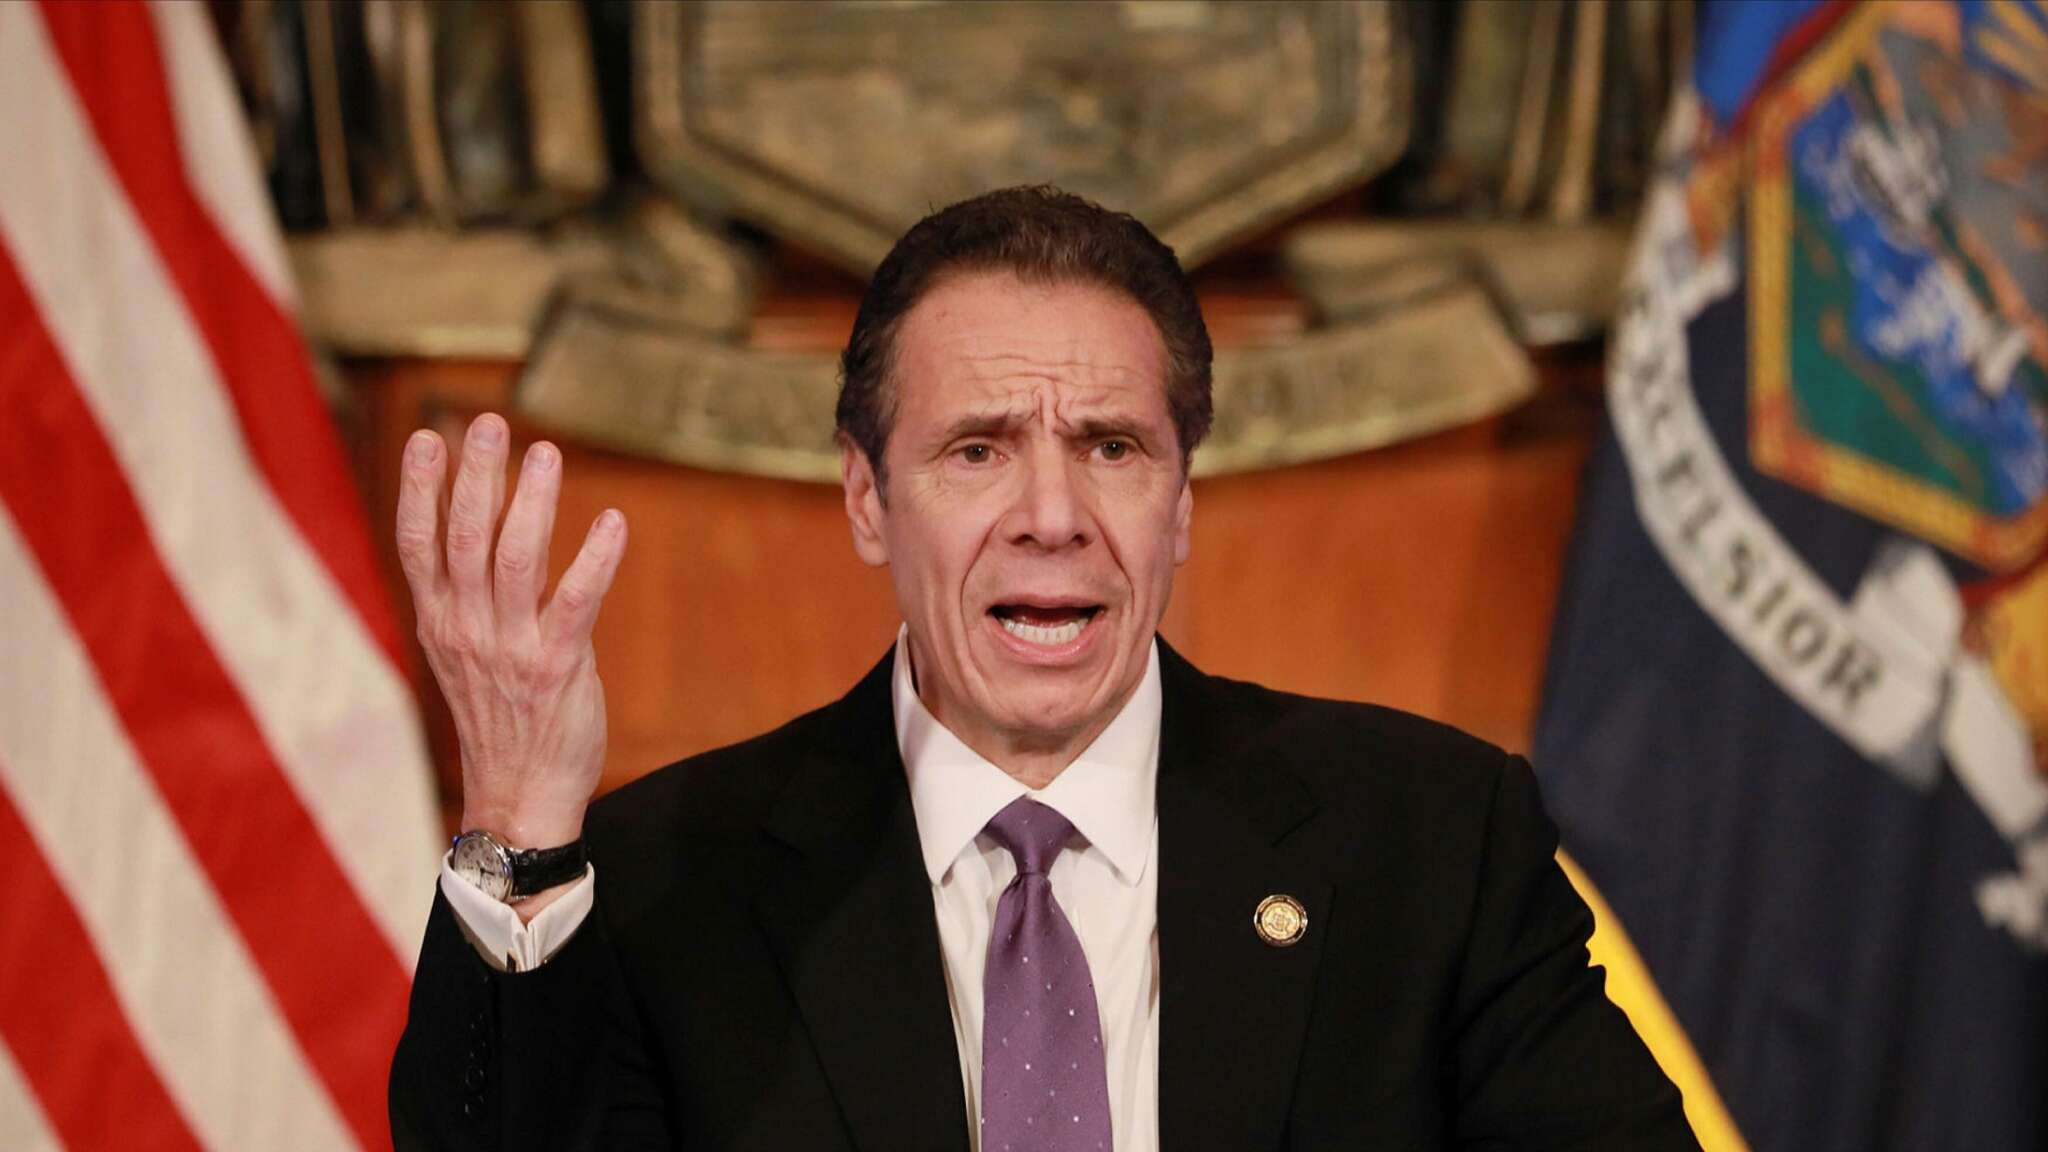 Governor Andrew Cuomo Plans To Legalize Adult-Use Recreational Cannabis In NYC